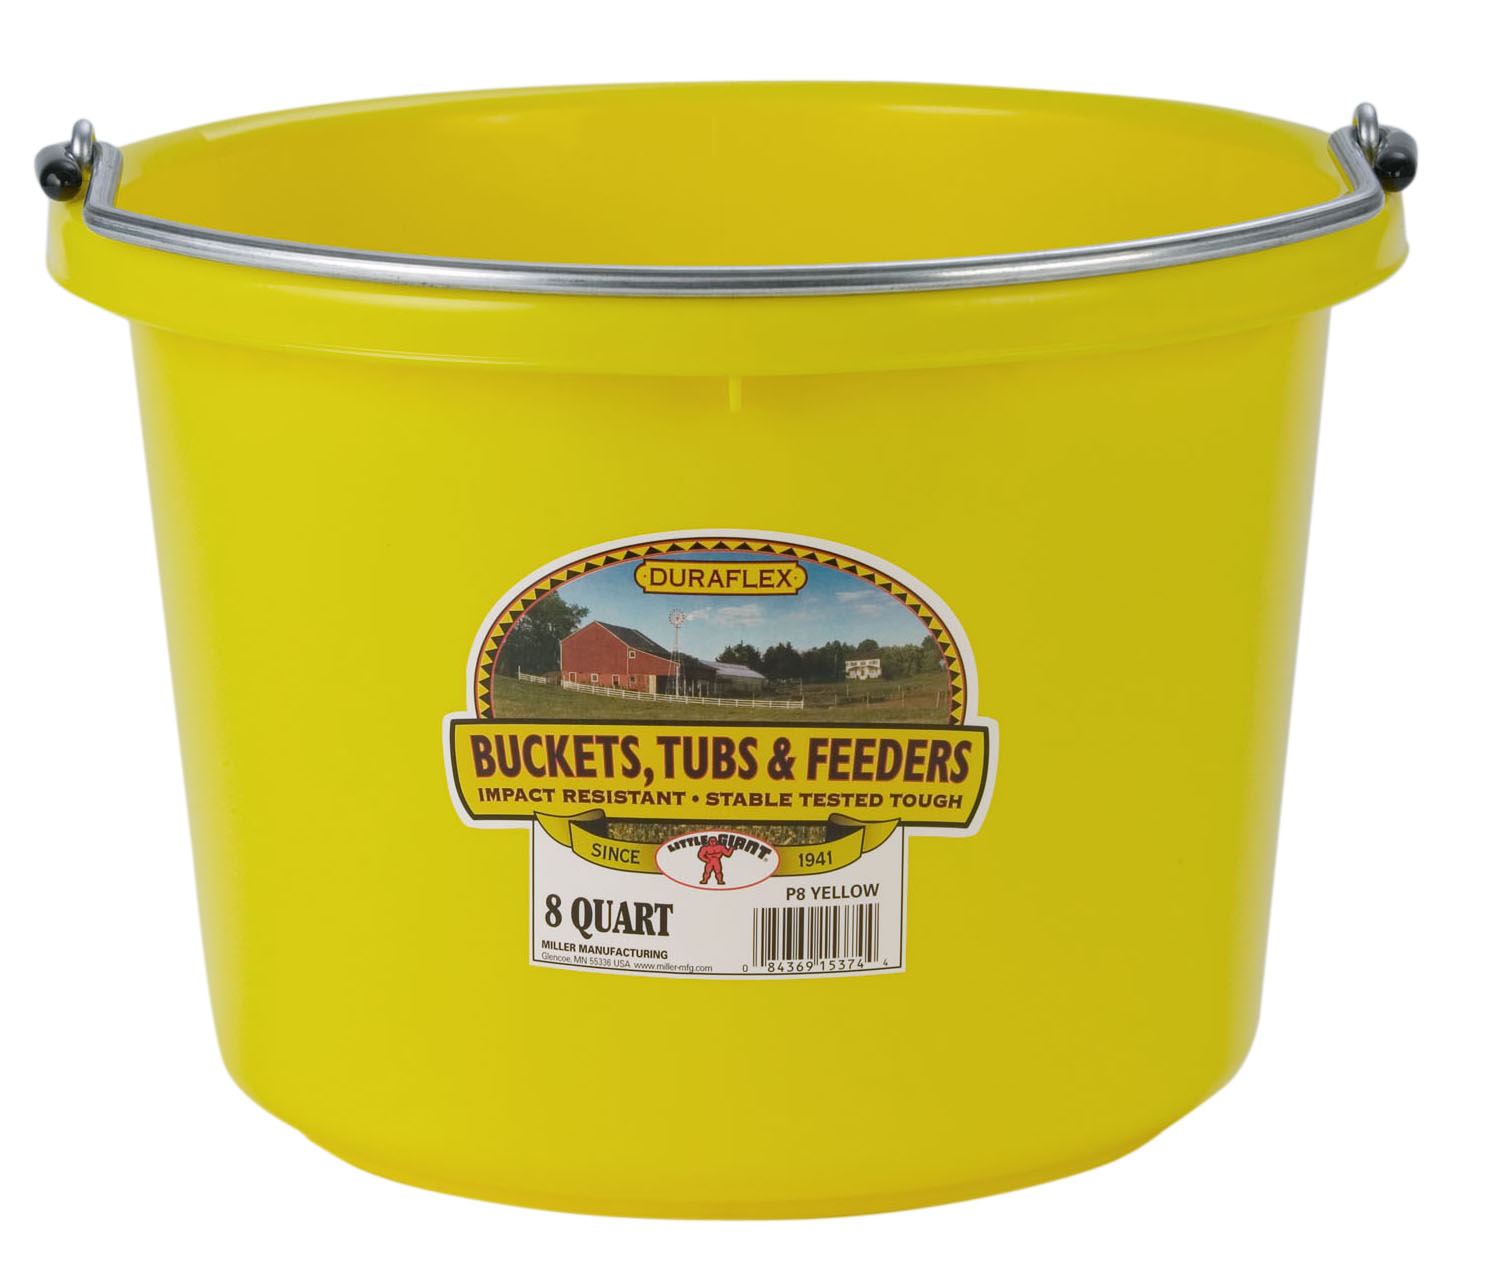 Blue Item No. CPHBLUE Little Giant Fence Feed Bucket 8 Quart Hook Over Feed Pail